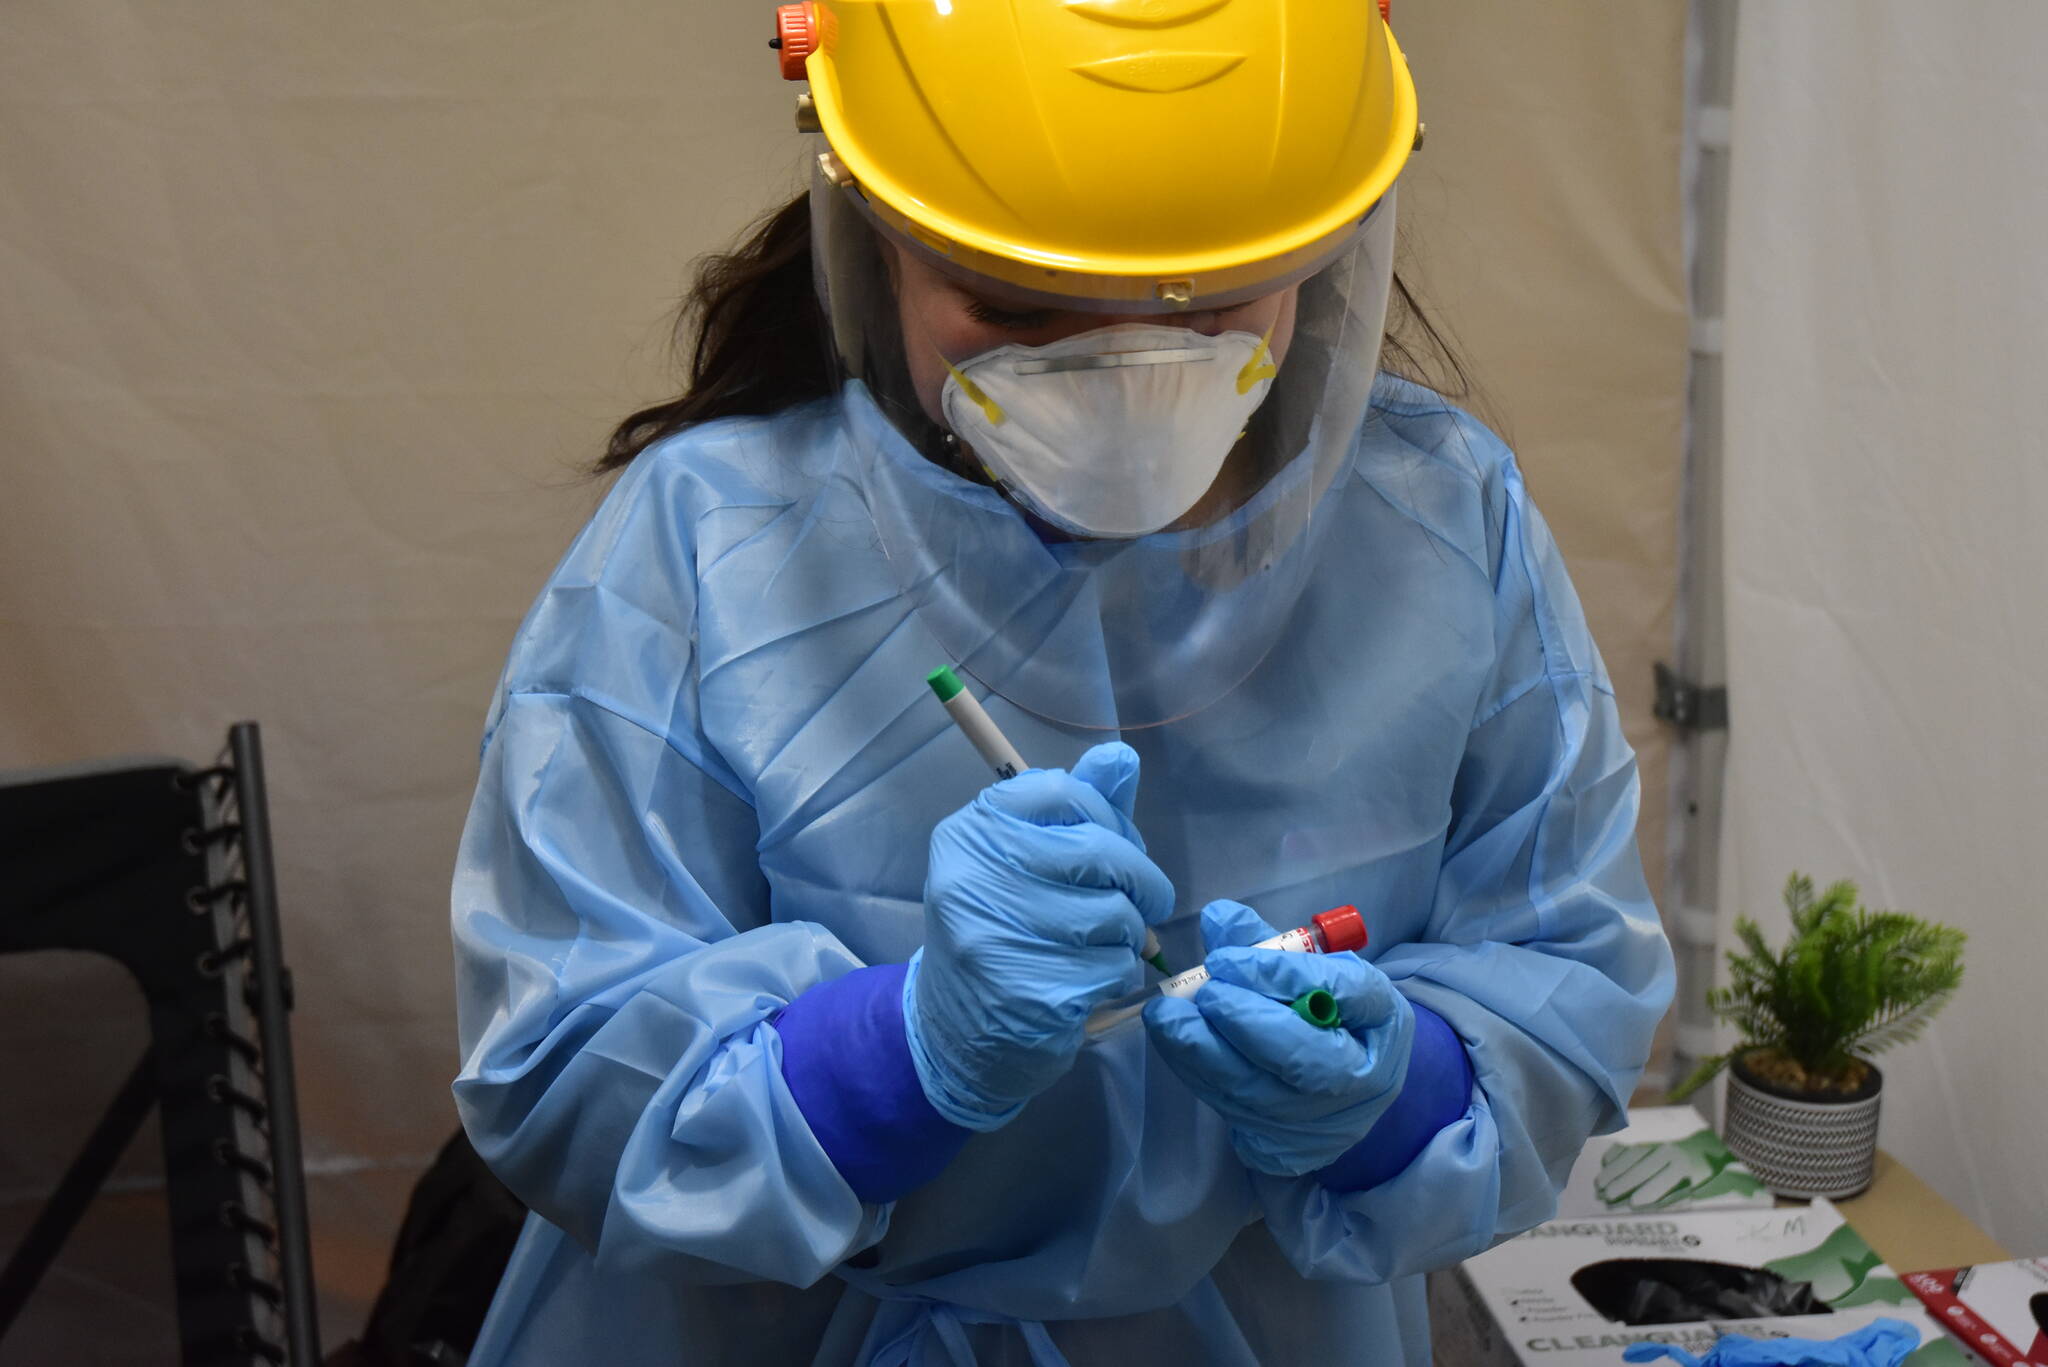 Health officials encouraged Juneau residents to be vigilant about COVID-19 mitigation and to get tested if they feel symptoms or have been exposed to the virus. The city has several testing cites open to the public including at Juneau International Airport, shown in this October 2020 photo, where emergency worker Melanie Chavez takes a COVID-19 test sample. (Peter Segall / Juneau Empire file)